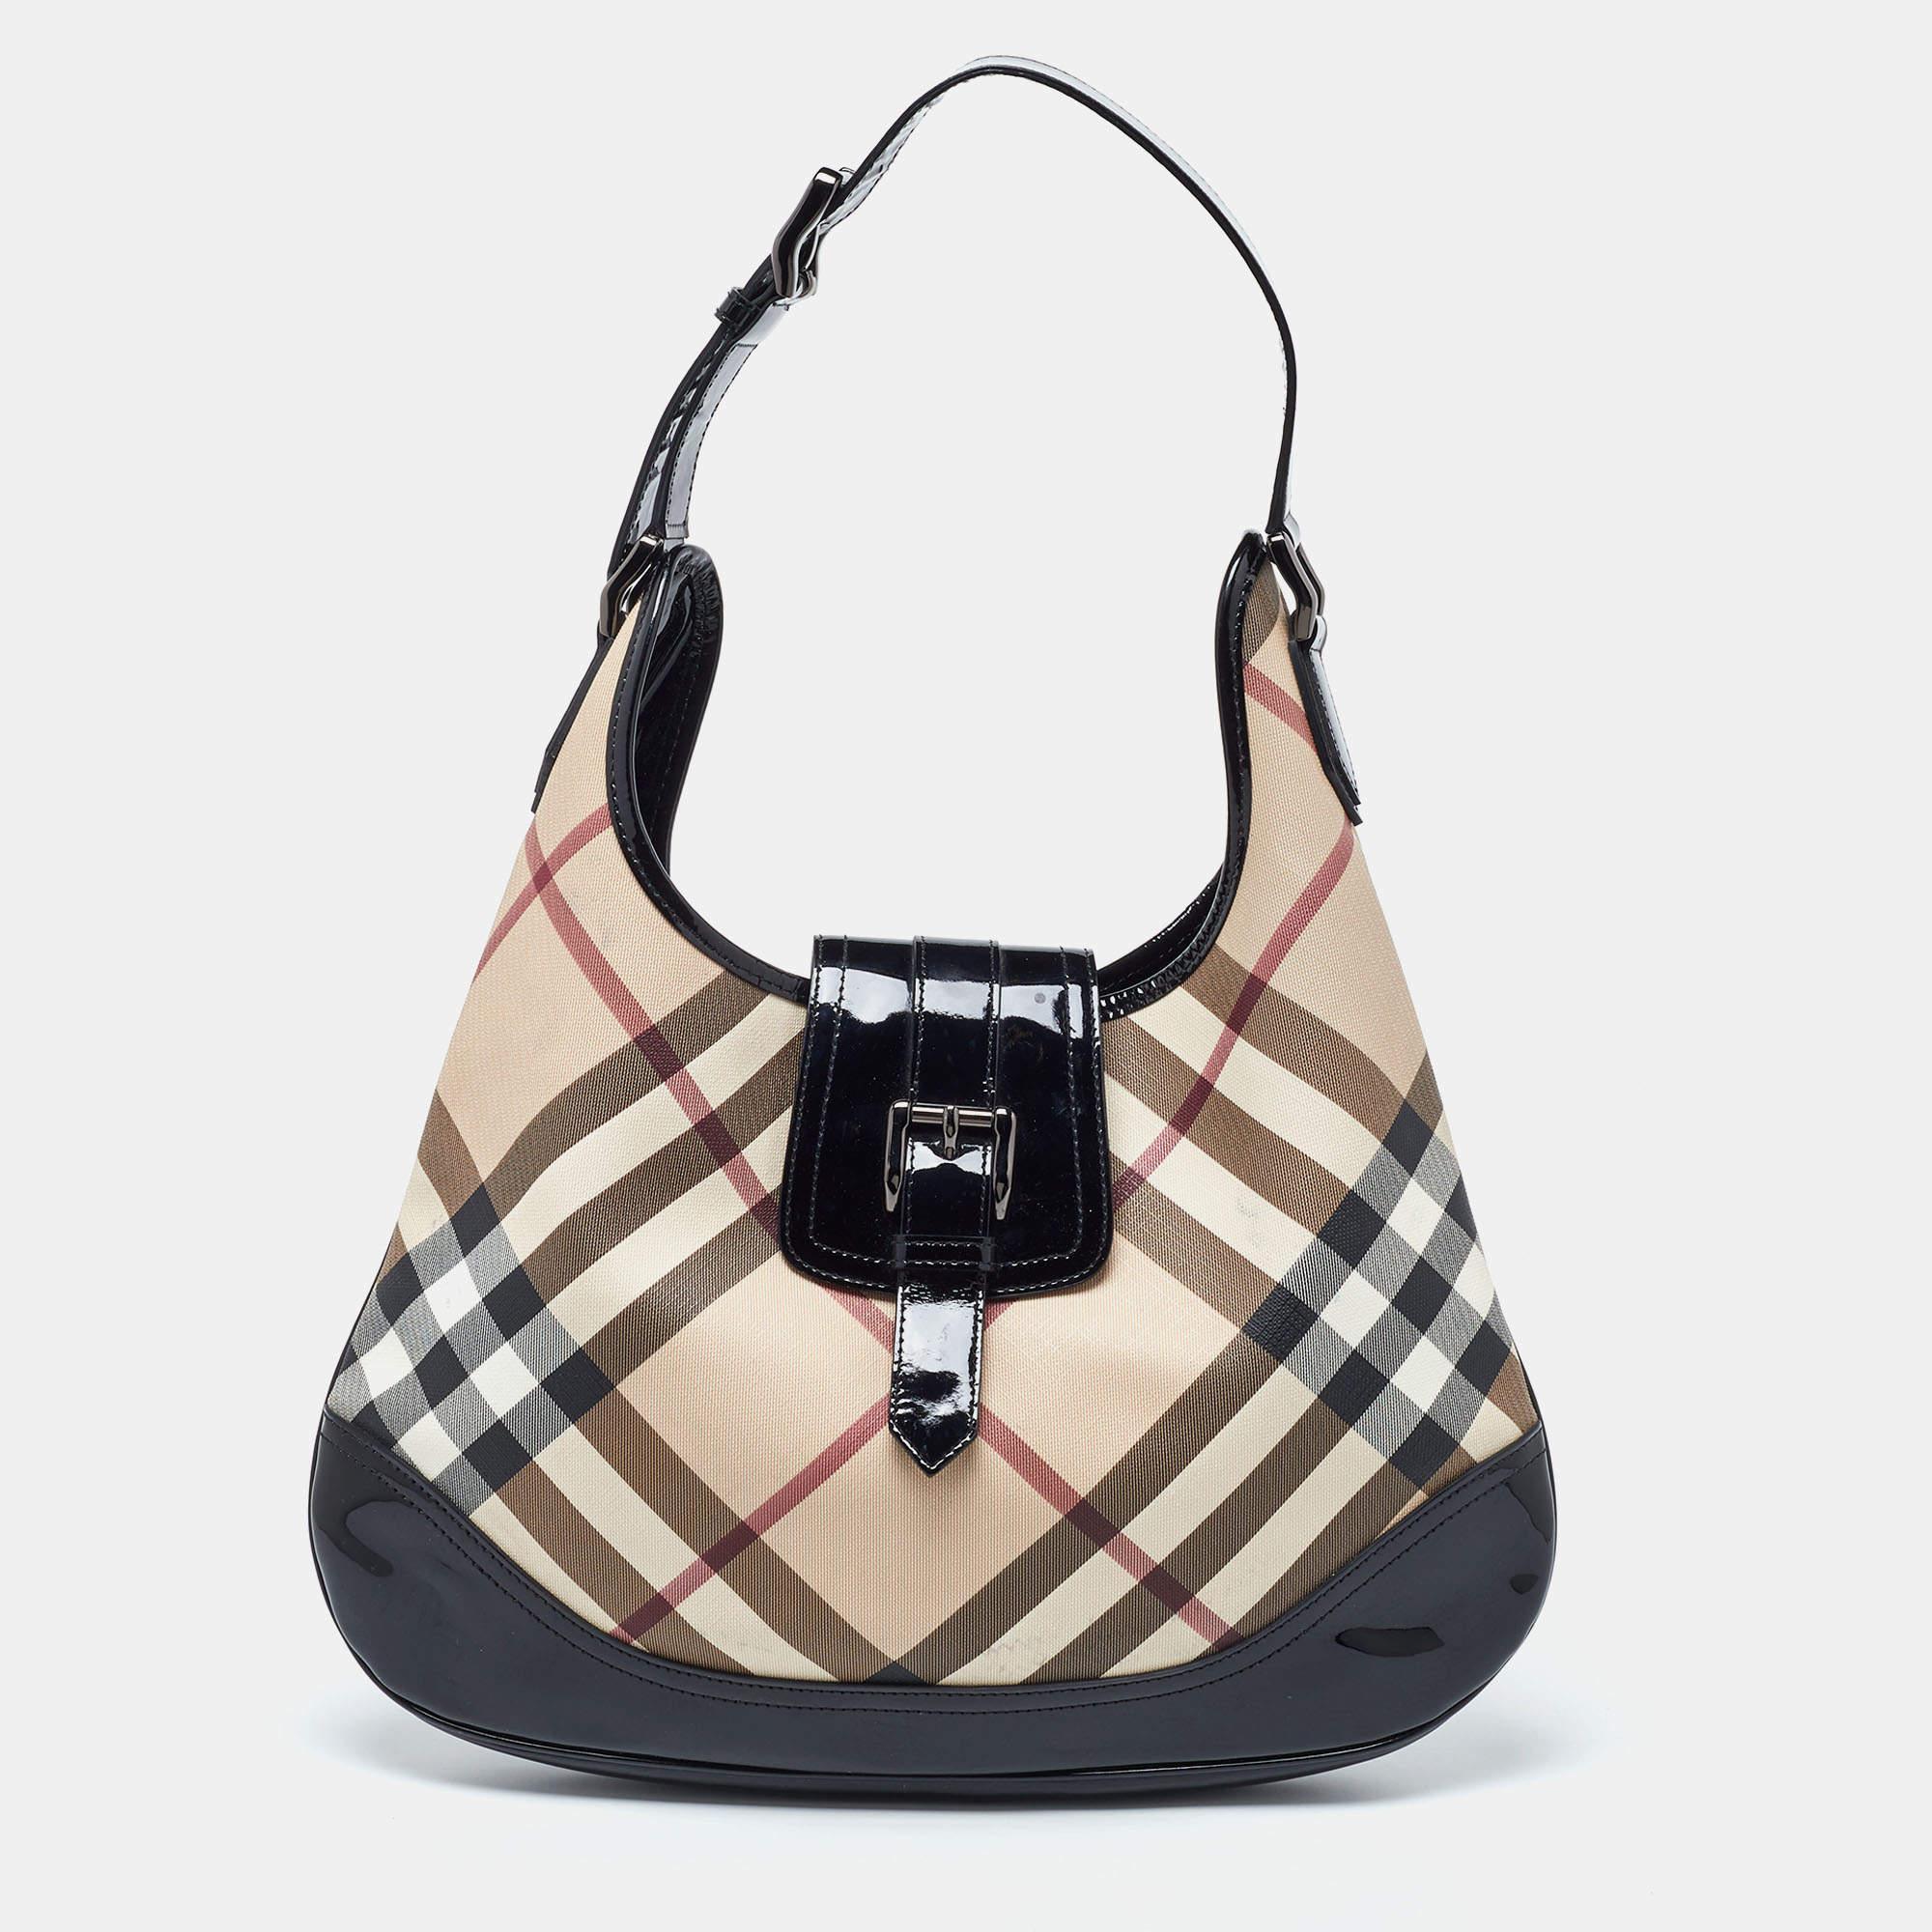 Burberry Beige/Black Nova Check PVC and Patent Leather Brooke Hobo For Sale